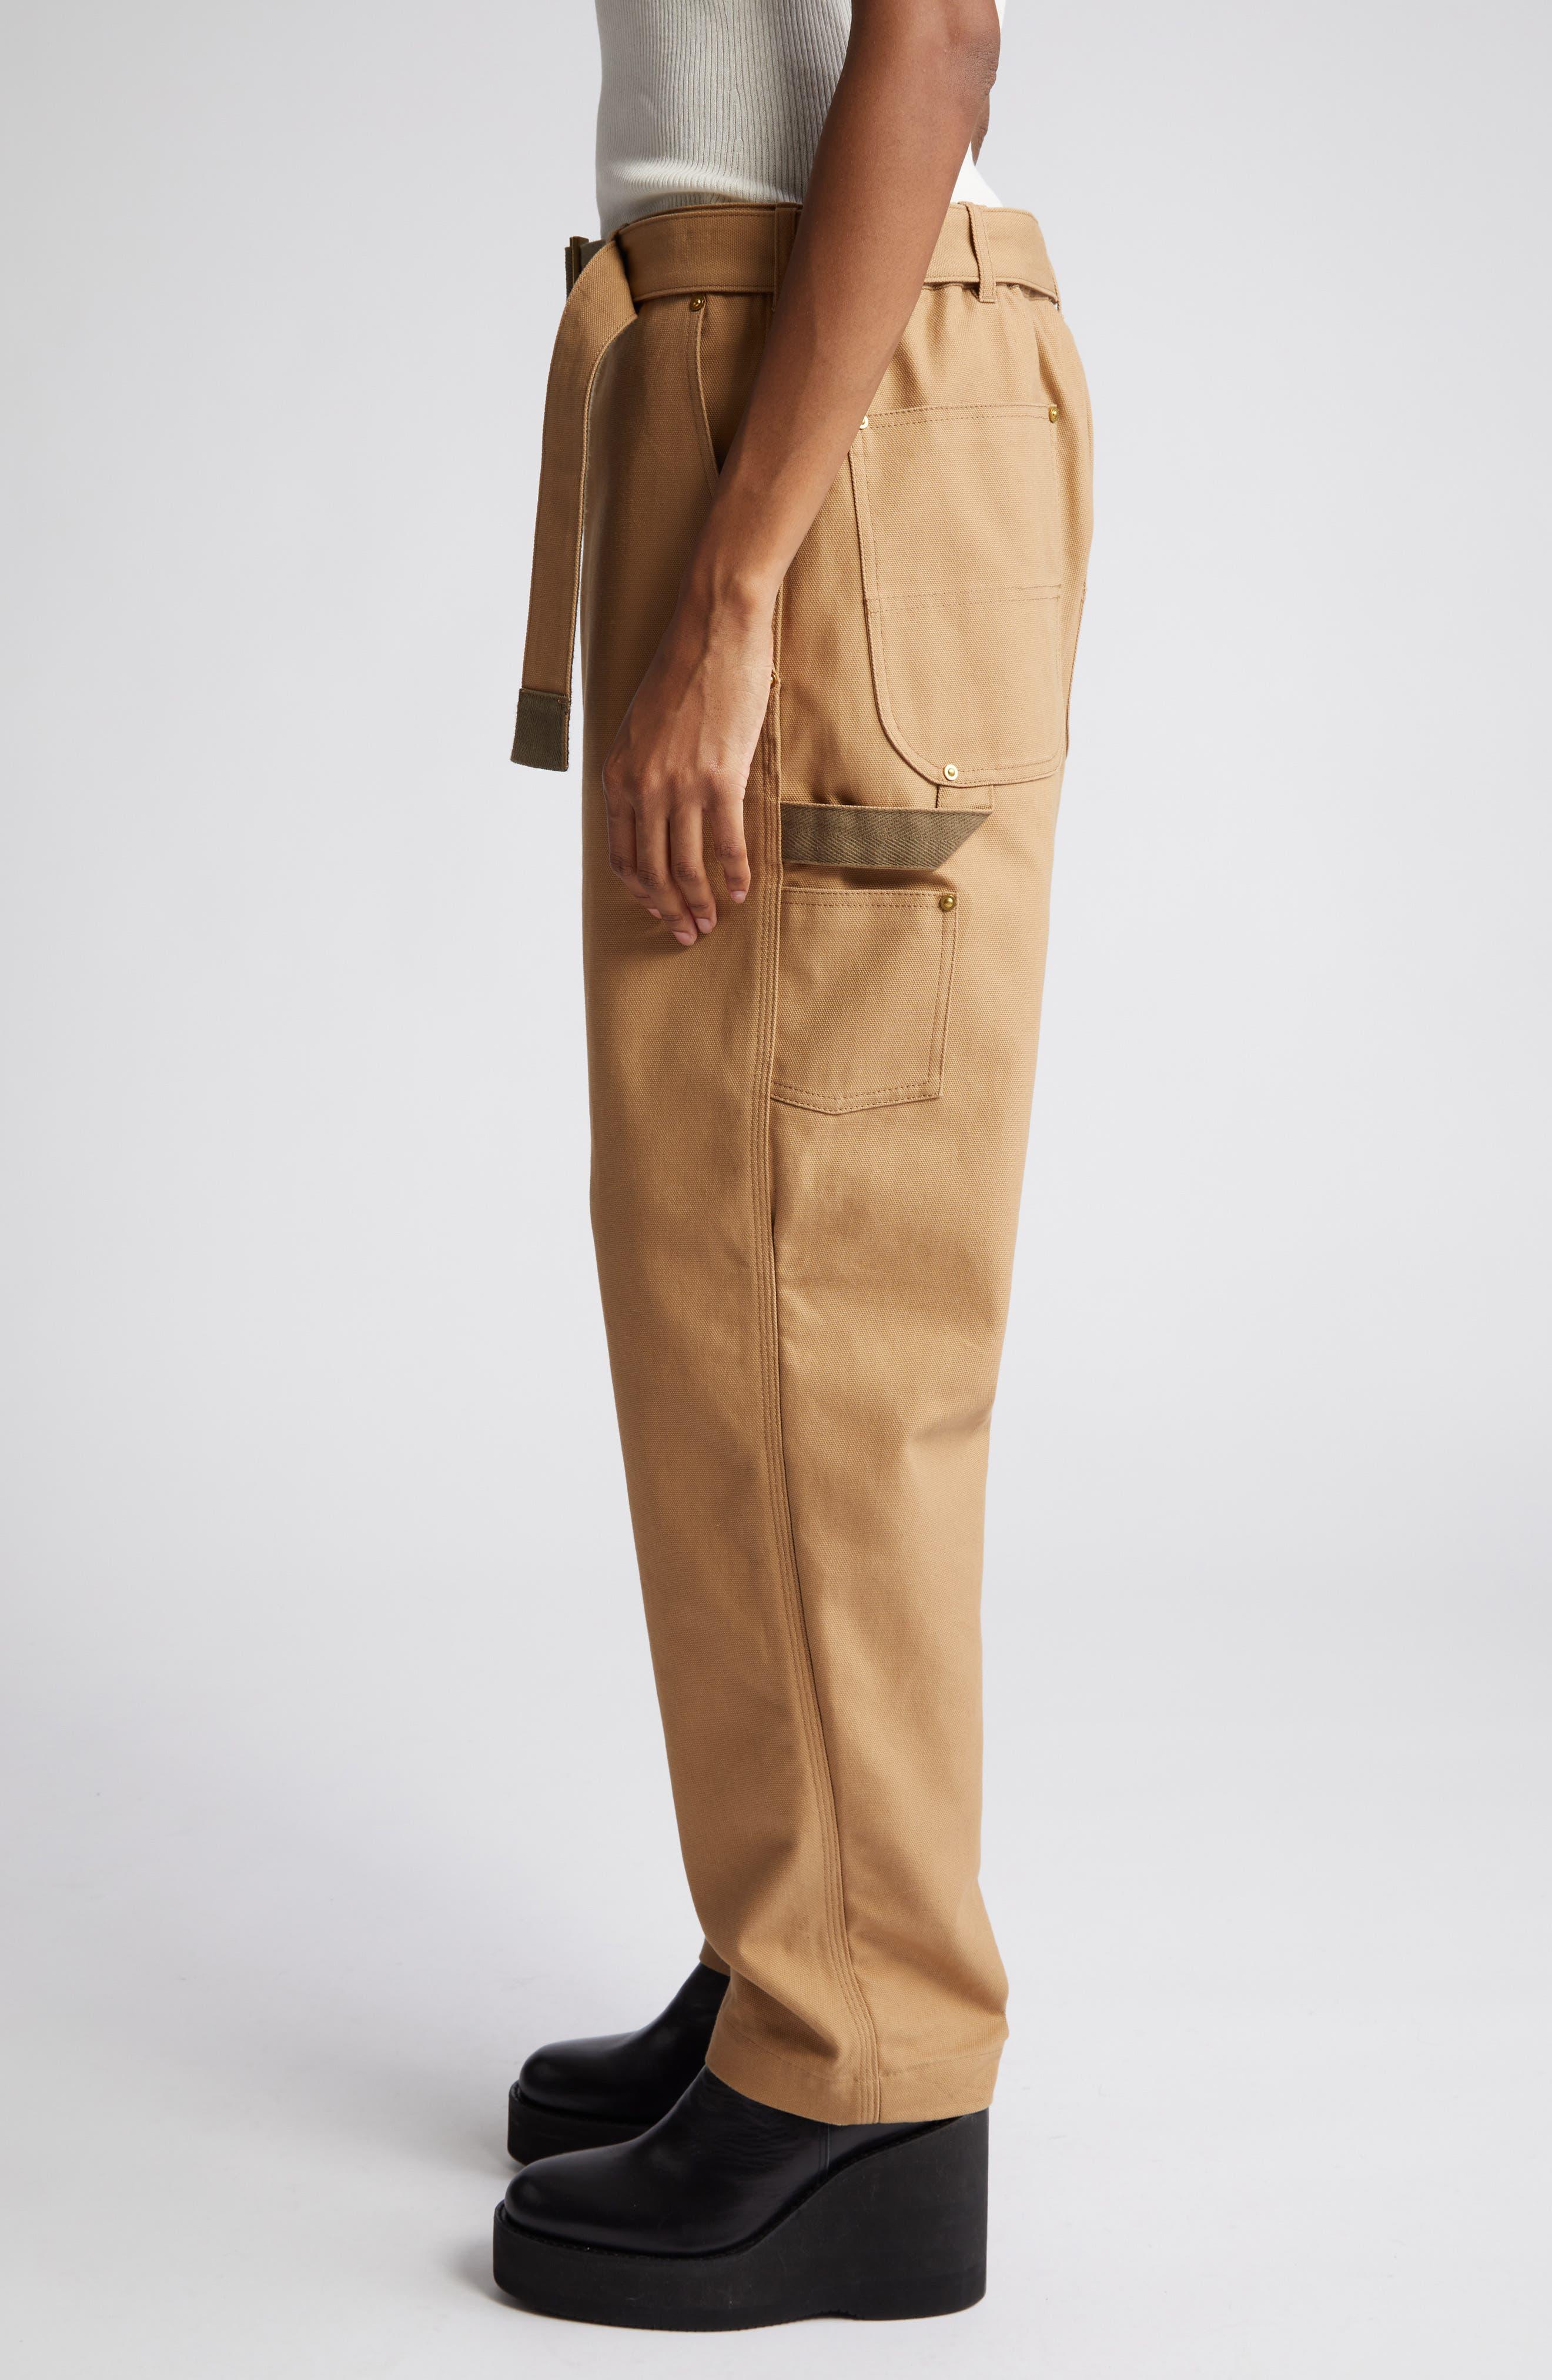 Sacai X Carhartt Wip Belted Cotton Canvas Pants in Natural for Men